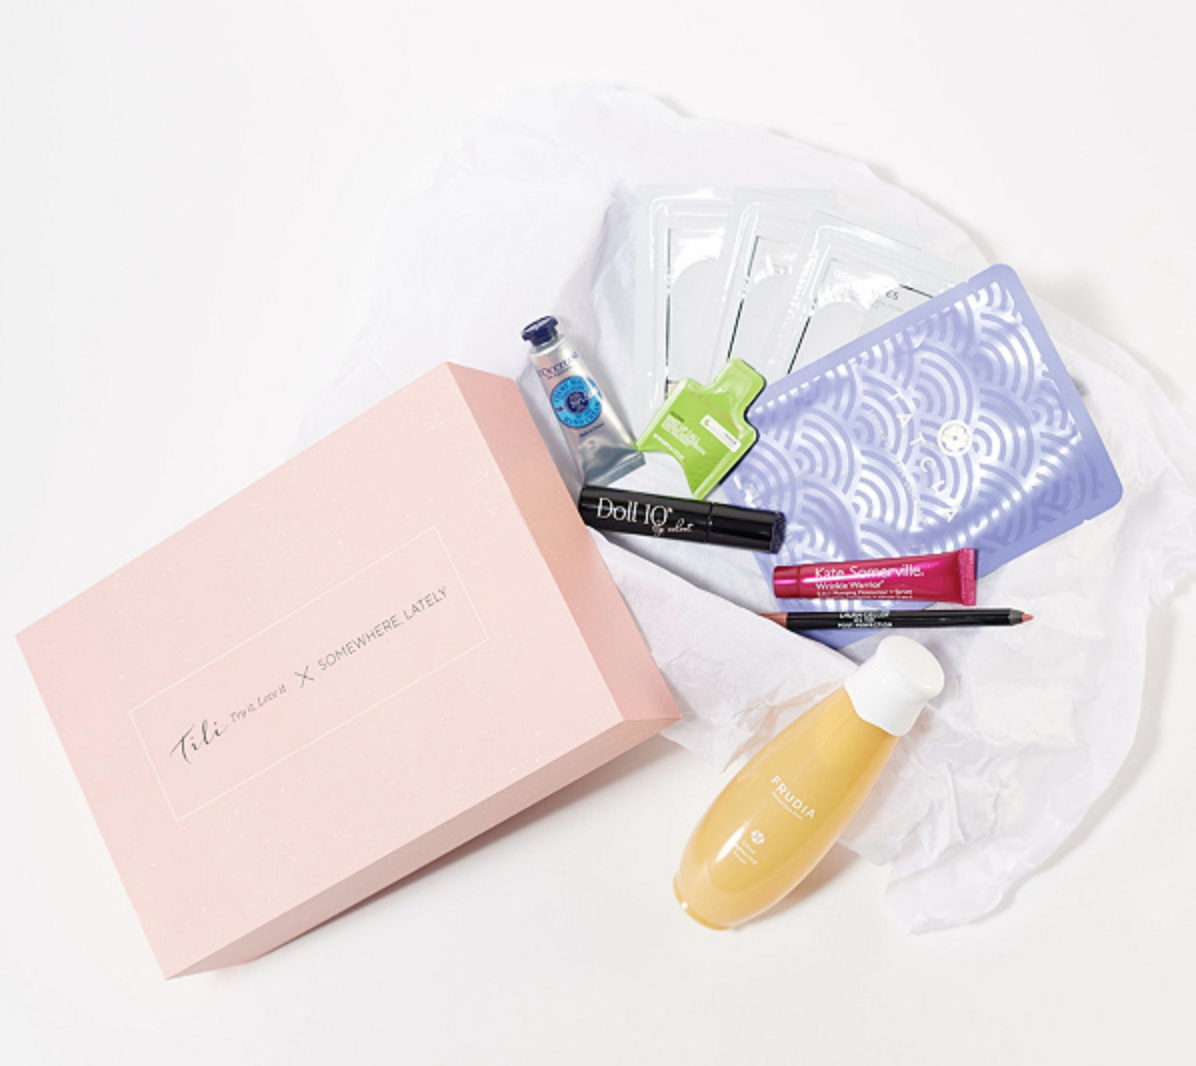 QVC TILI November 2019 Beauty Subscription Box Available Now + Full Spoilers!